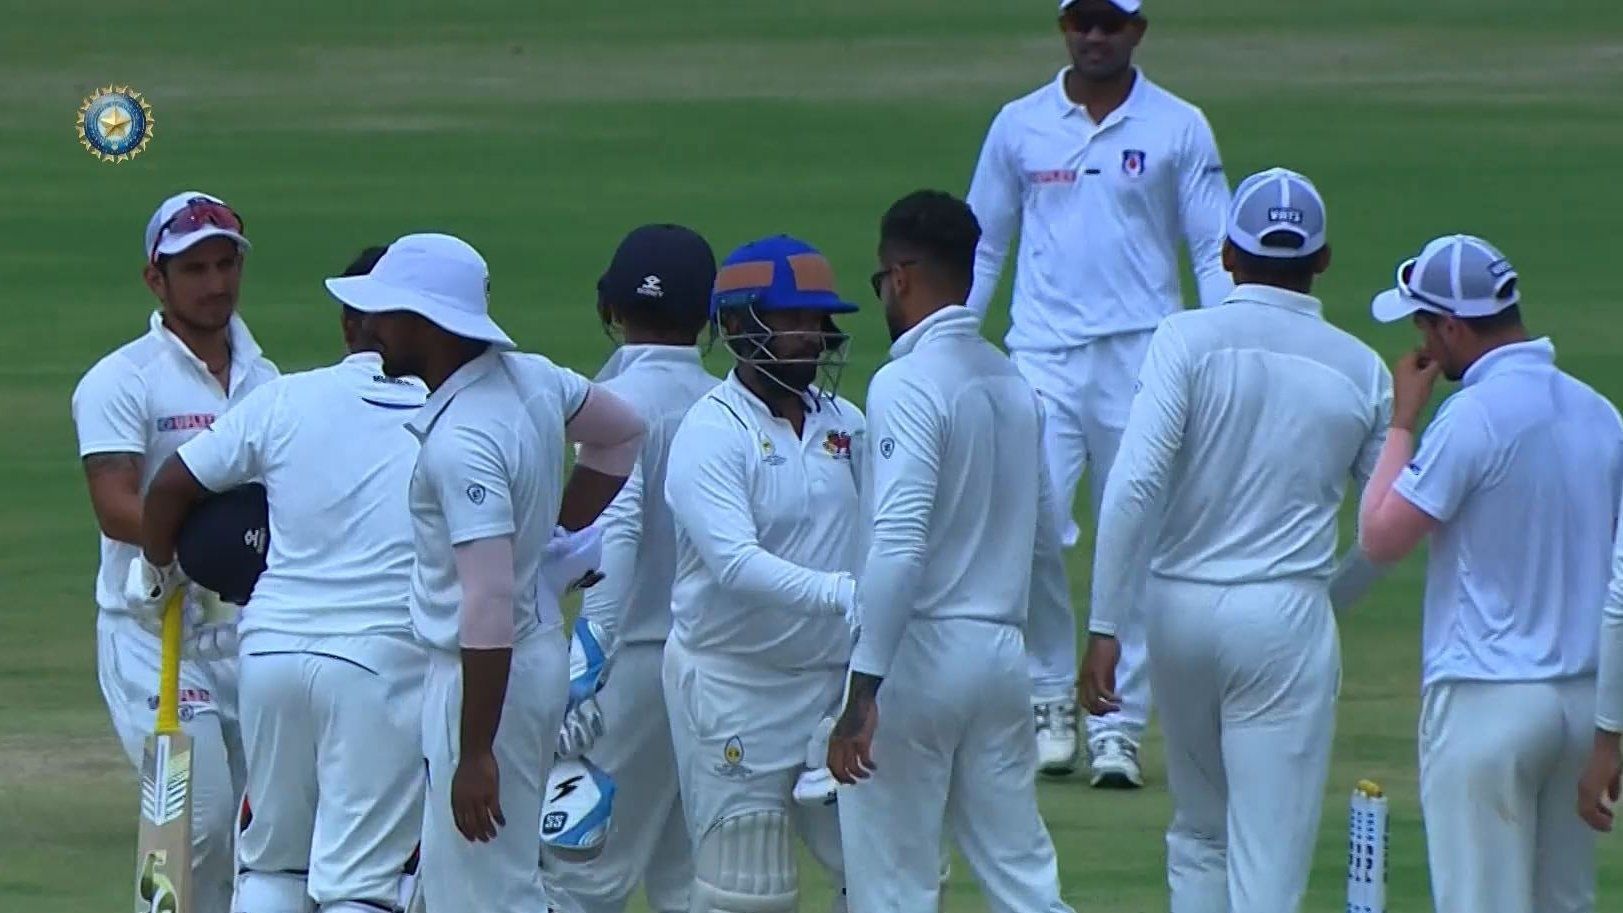 Mumbai and UP players shake hands after the semi-final. Pic: BCCI